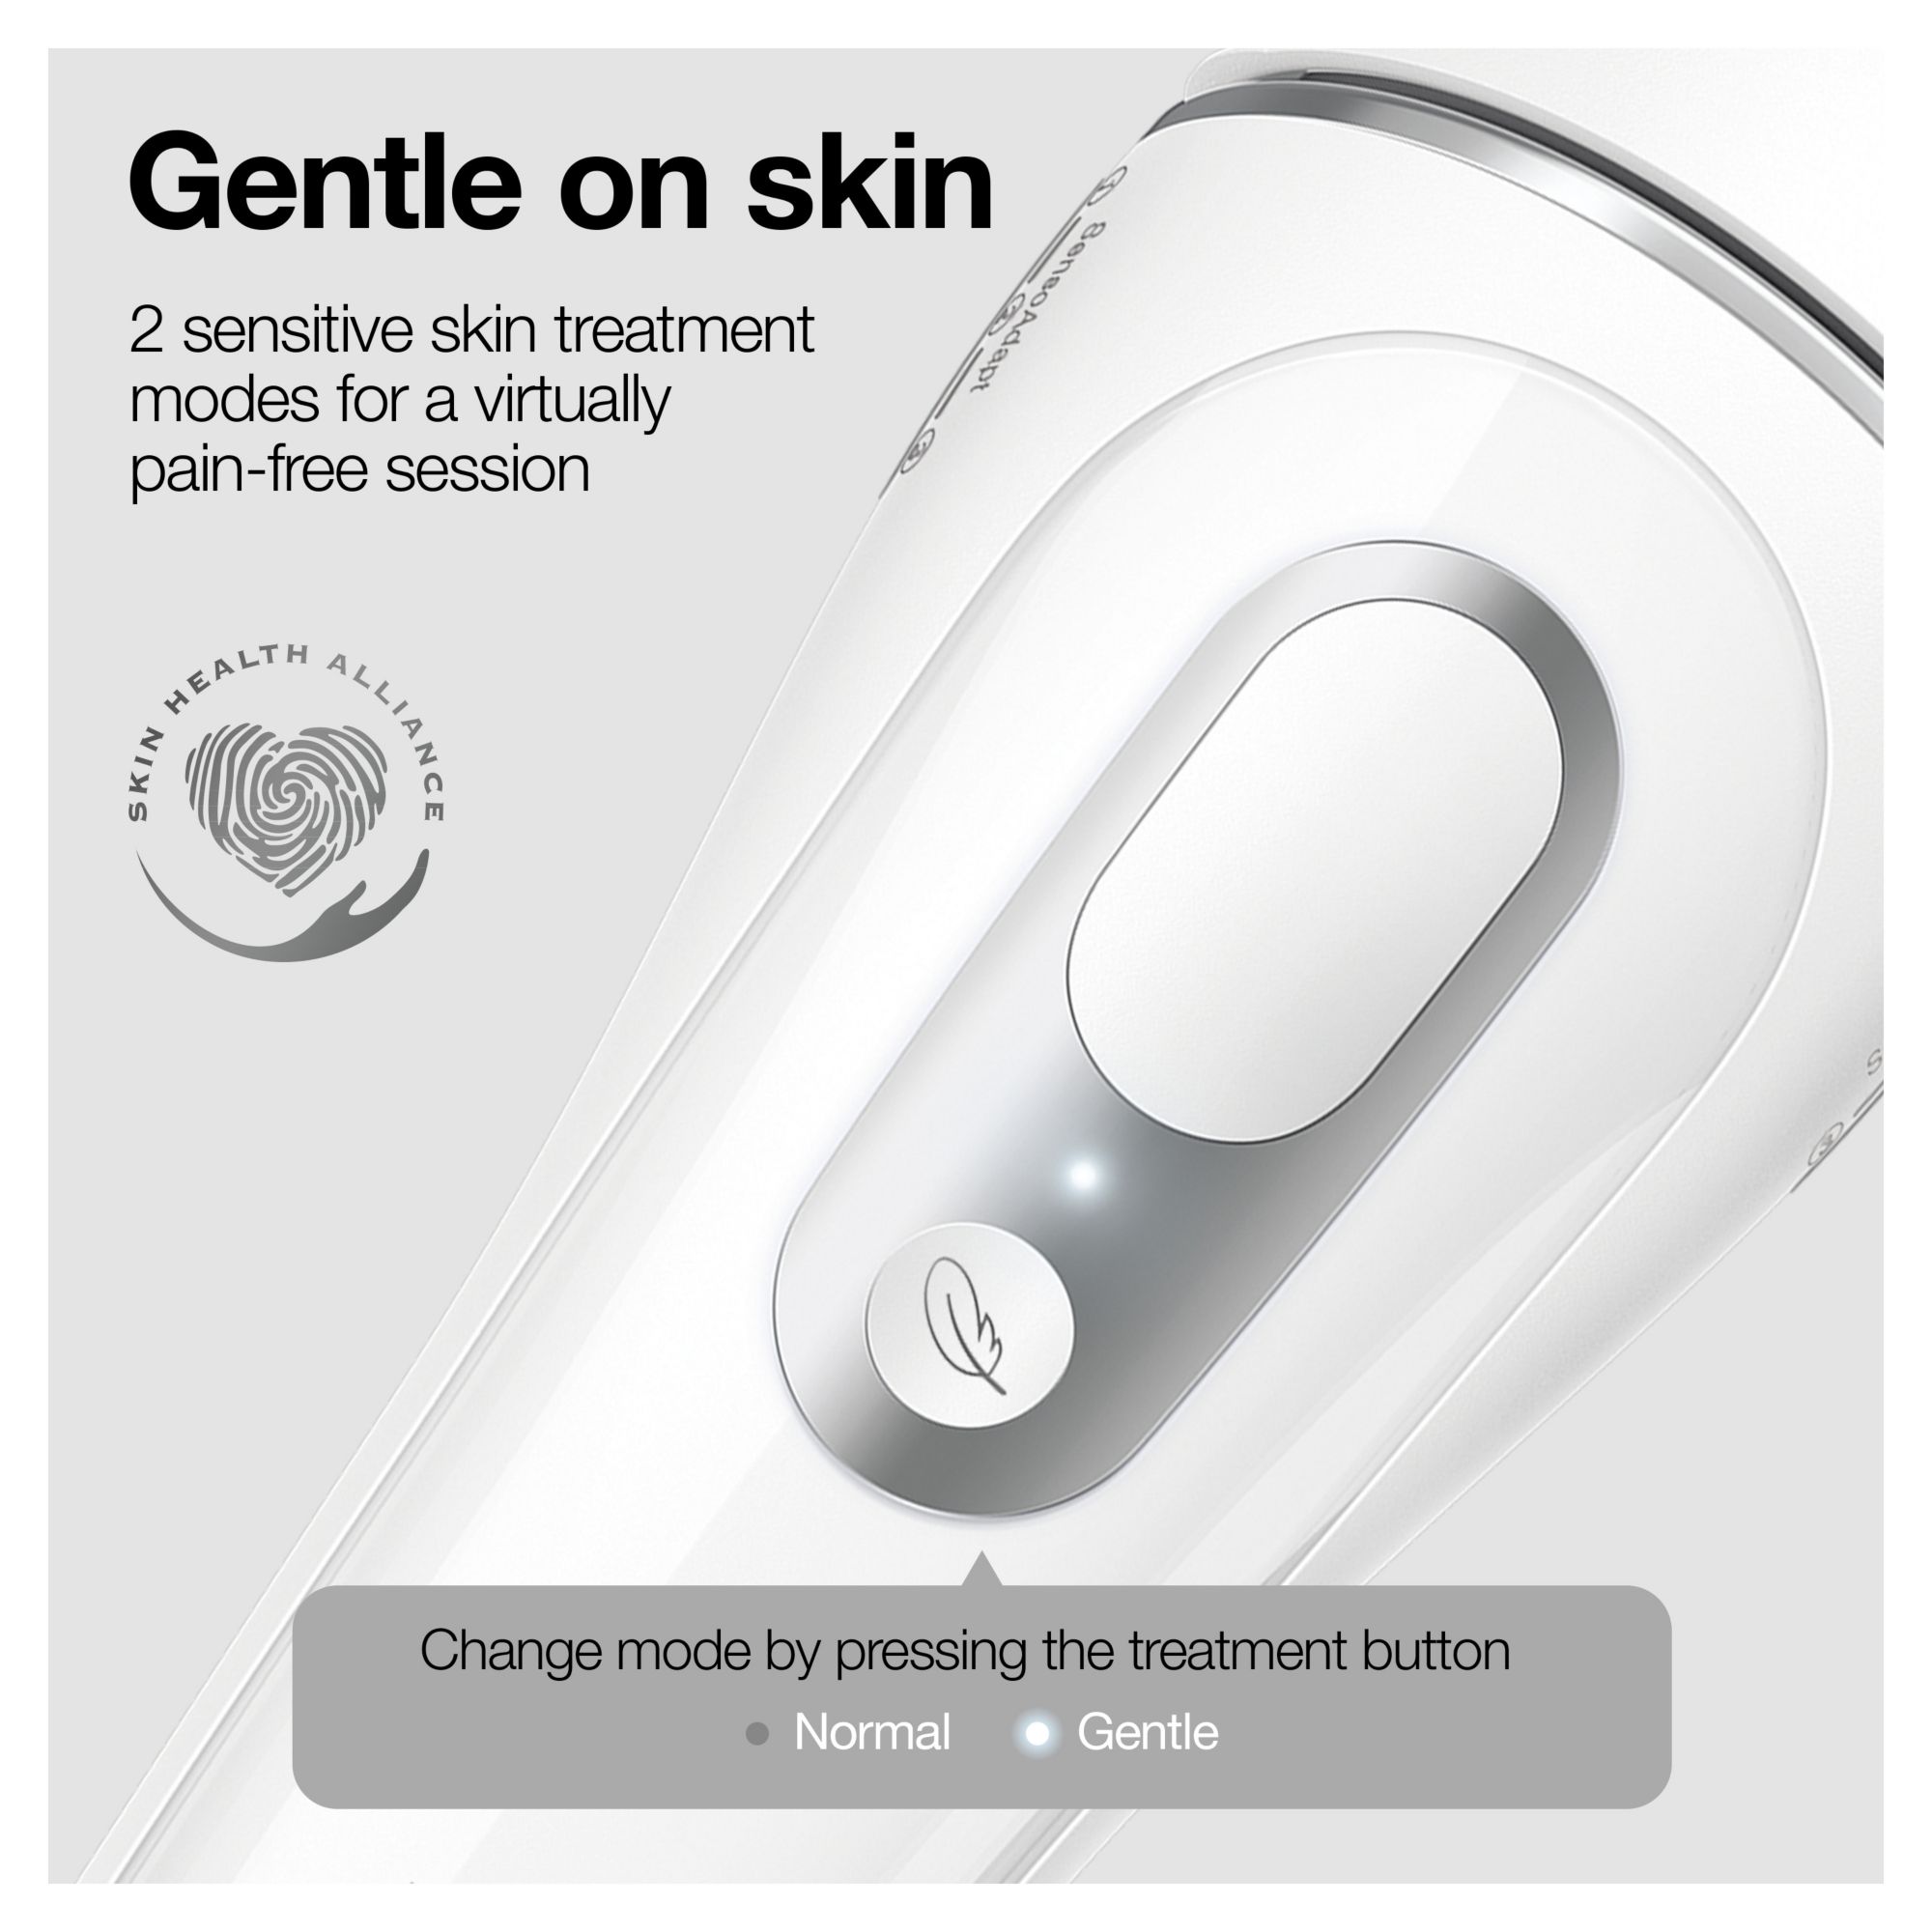 Braun Silk Expert Pro 3 IPL At-Home Hair Removal System for Men & Women |  BJ's Wholesale Club